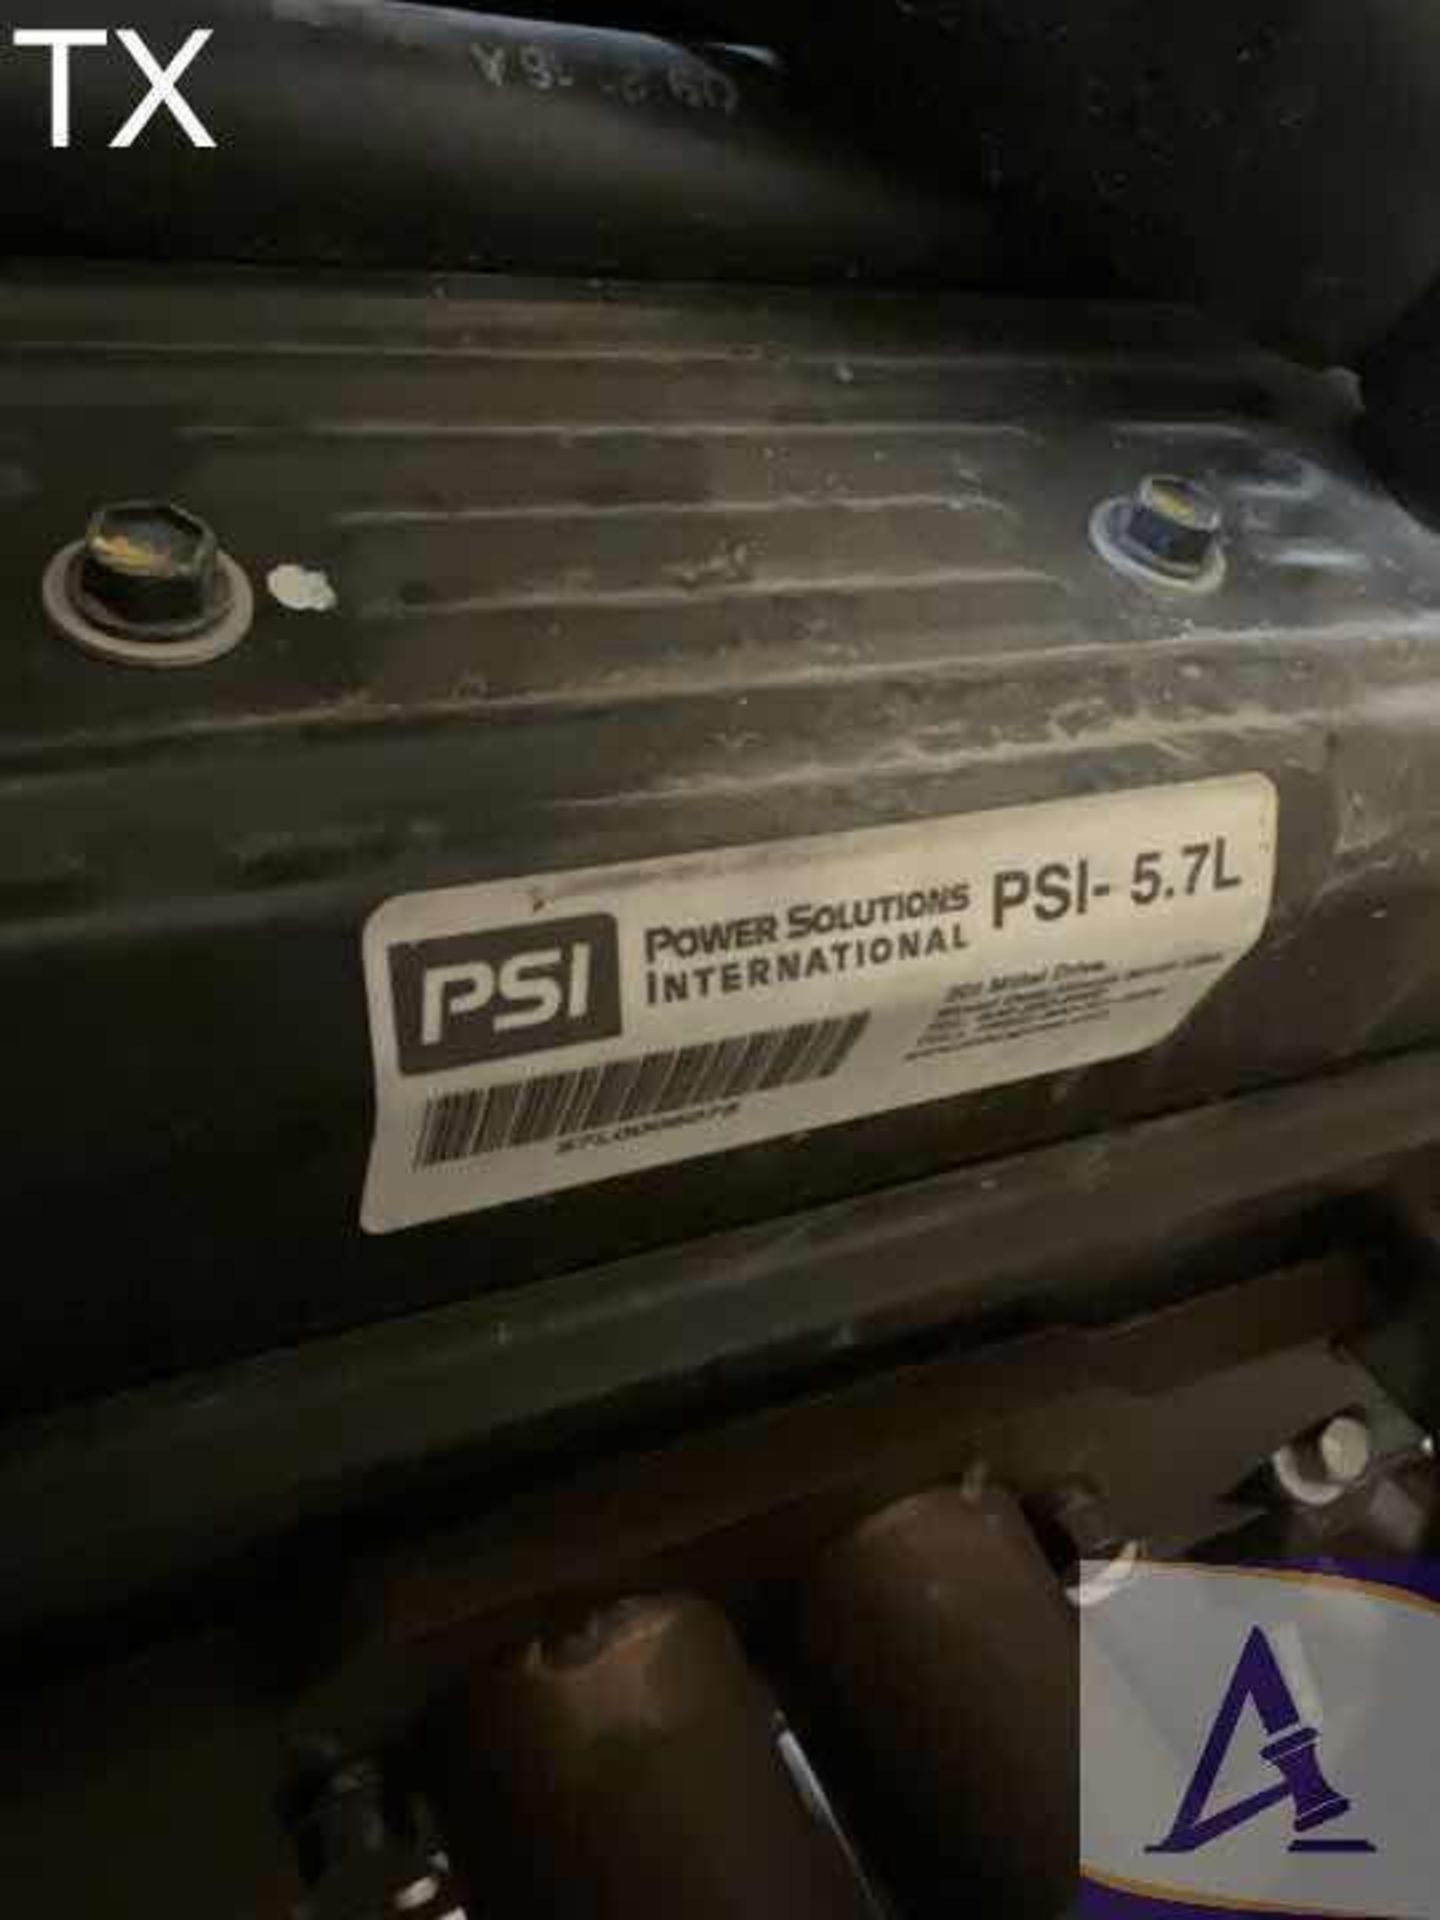 **UNUSED** PSI Natural Gas / Propane 5.7L V8 Engine, Digital Control Panel, Water Cooled - Image 3 of 3